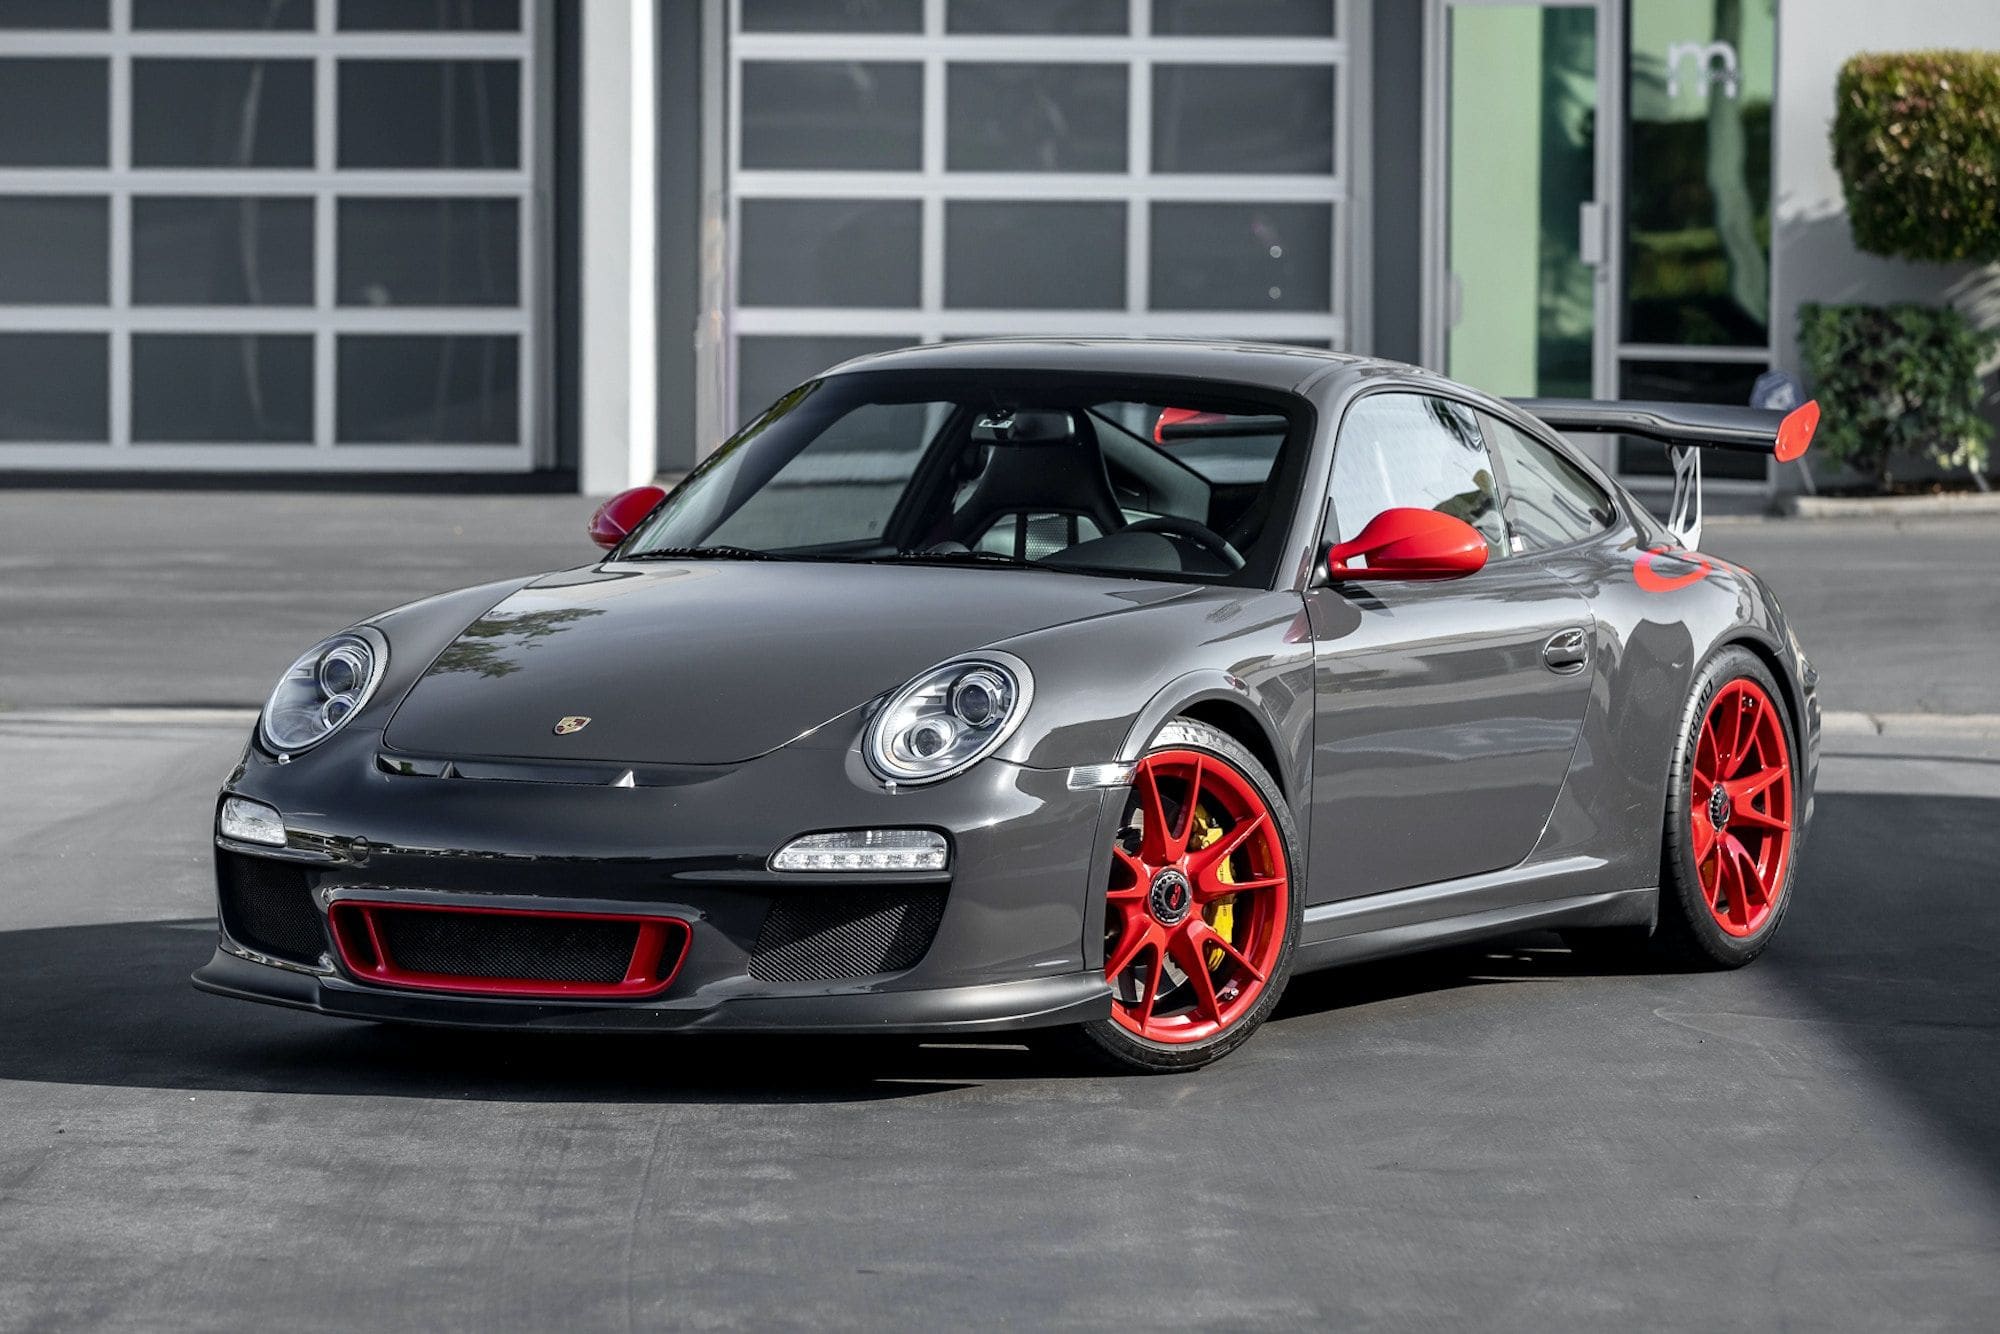 2010 - 2011 Porsche GT3 - WTB: 2010/2011 997.2 GT3RS - Used - Brea, CA 92821, United States